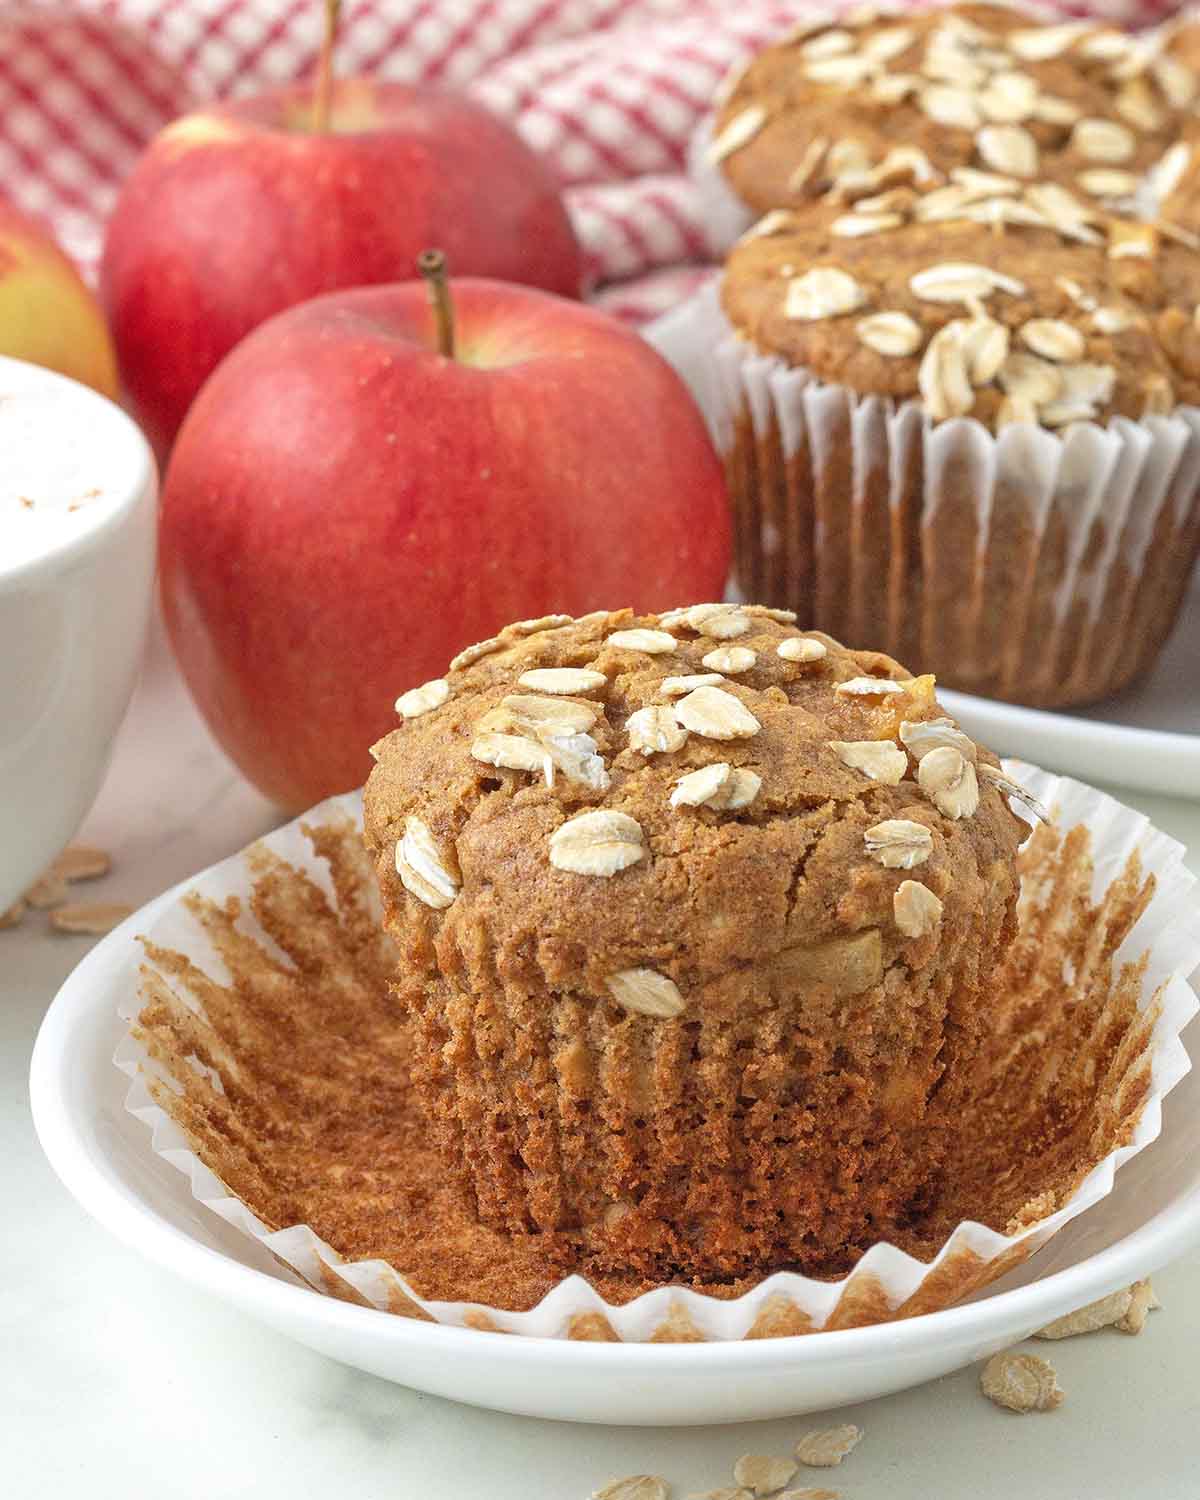 An apple cinnamon oatmeal muffin on a plate, the muffin wrapper has been peeled away.